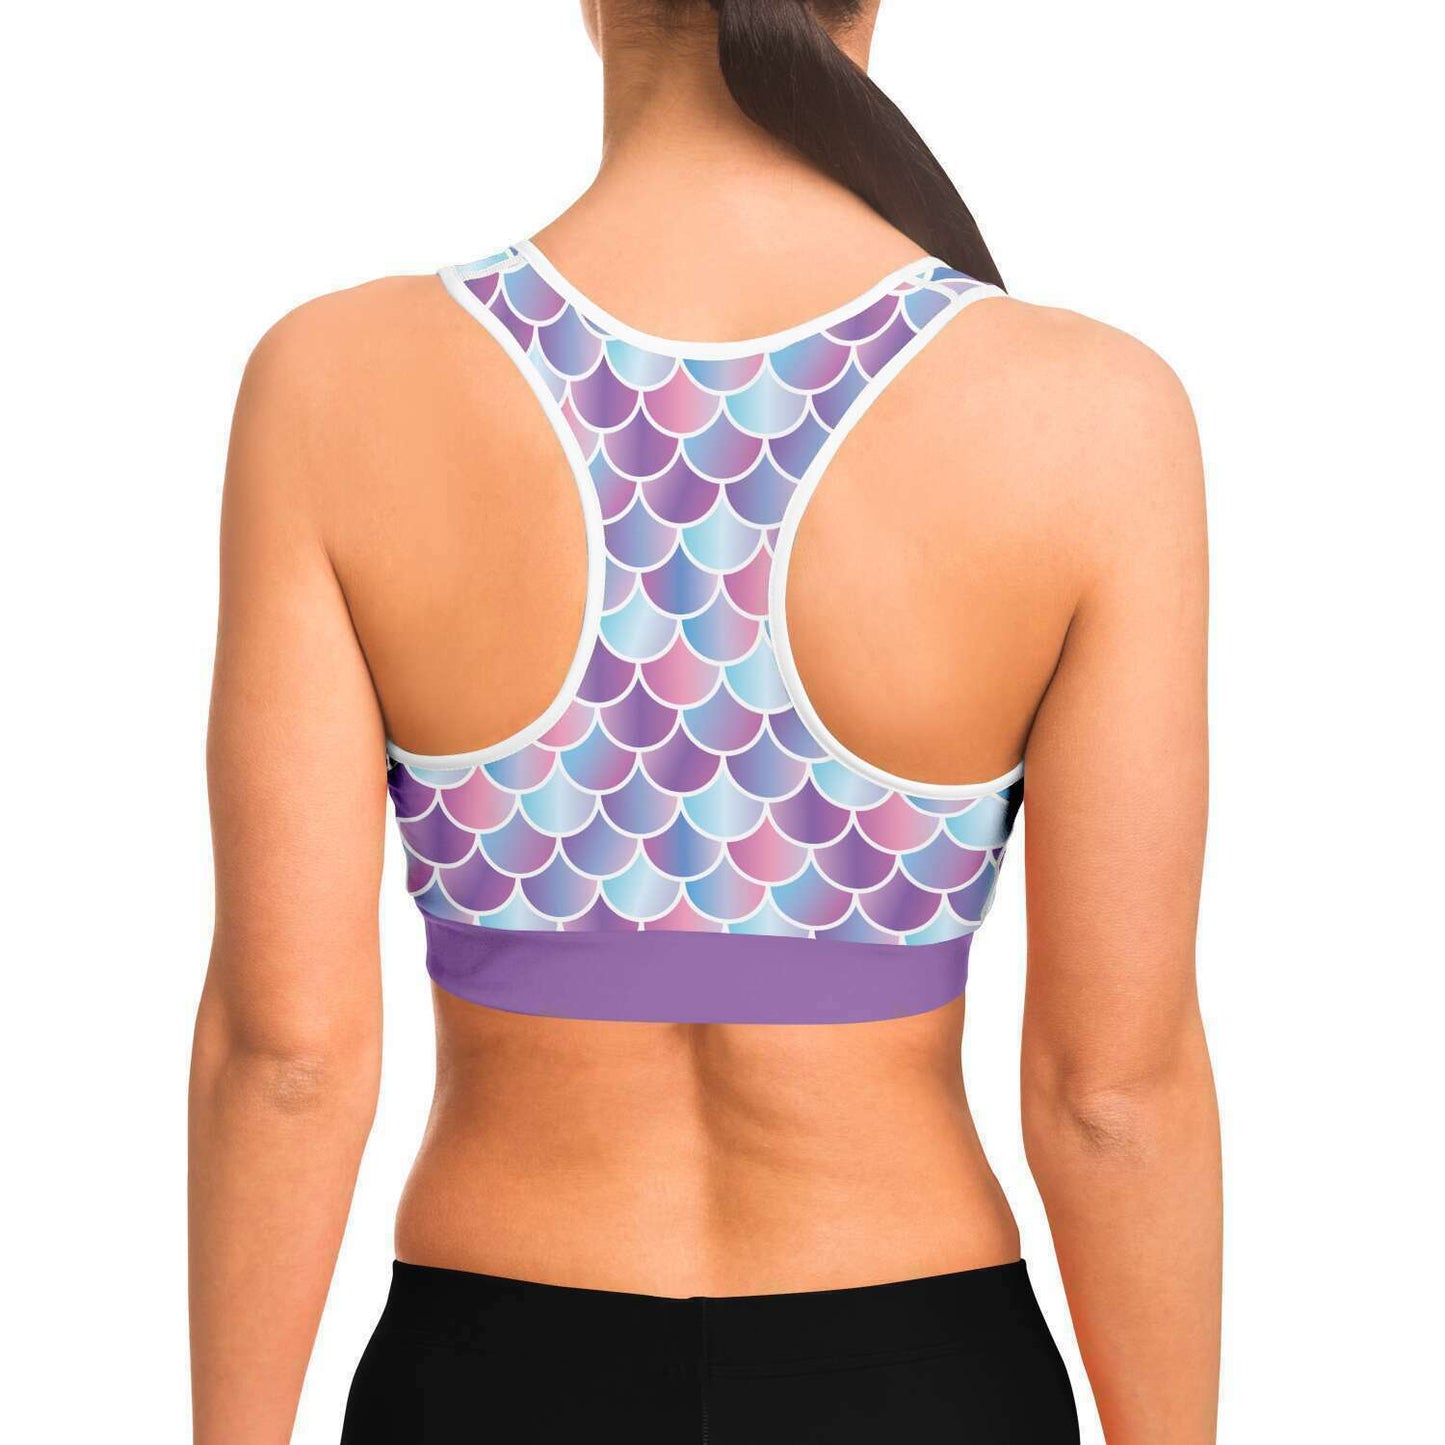 Back view on model of mermaid / merman sports bra crop top for scuba divers and sports